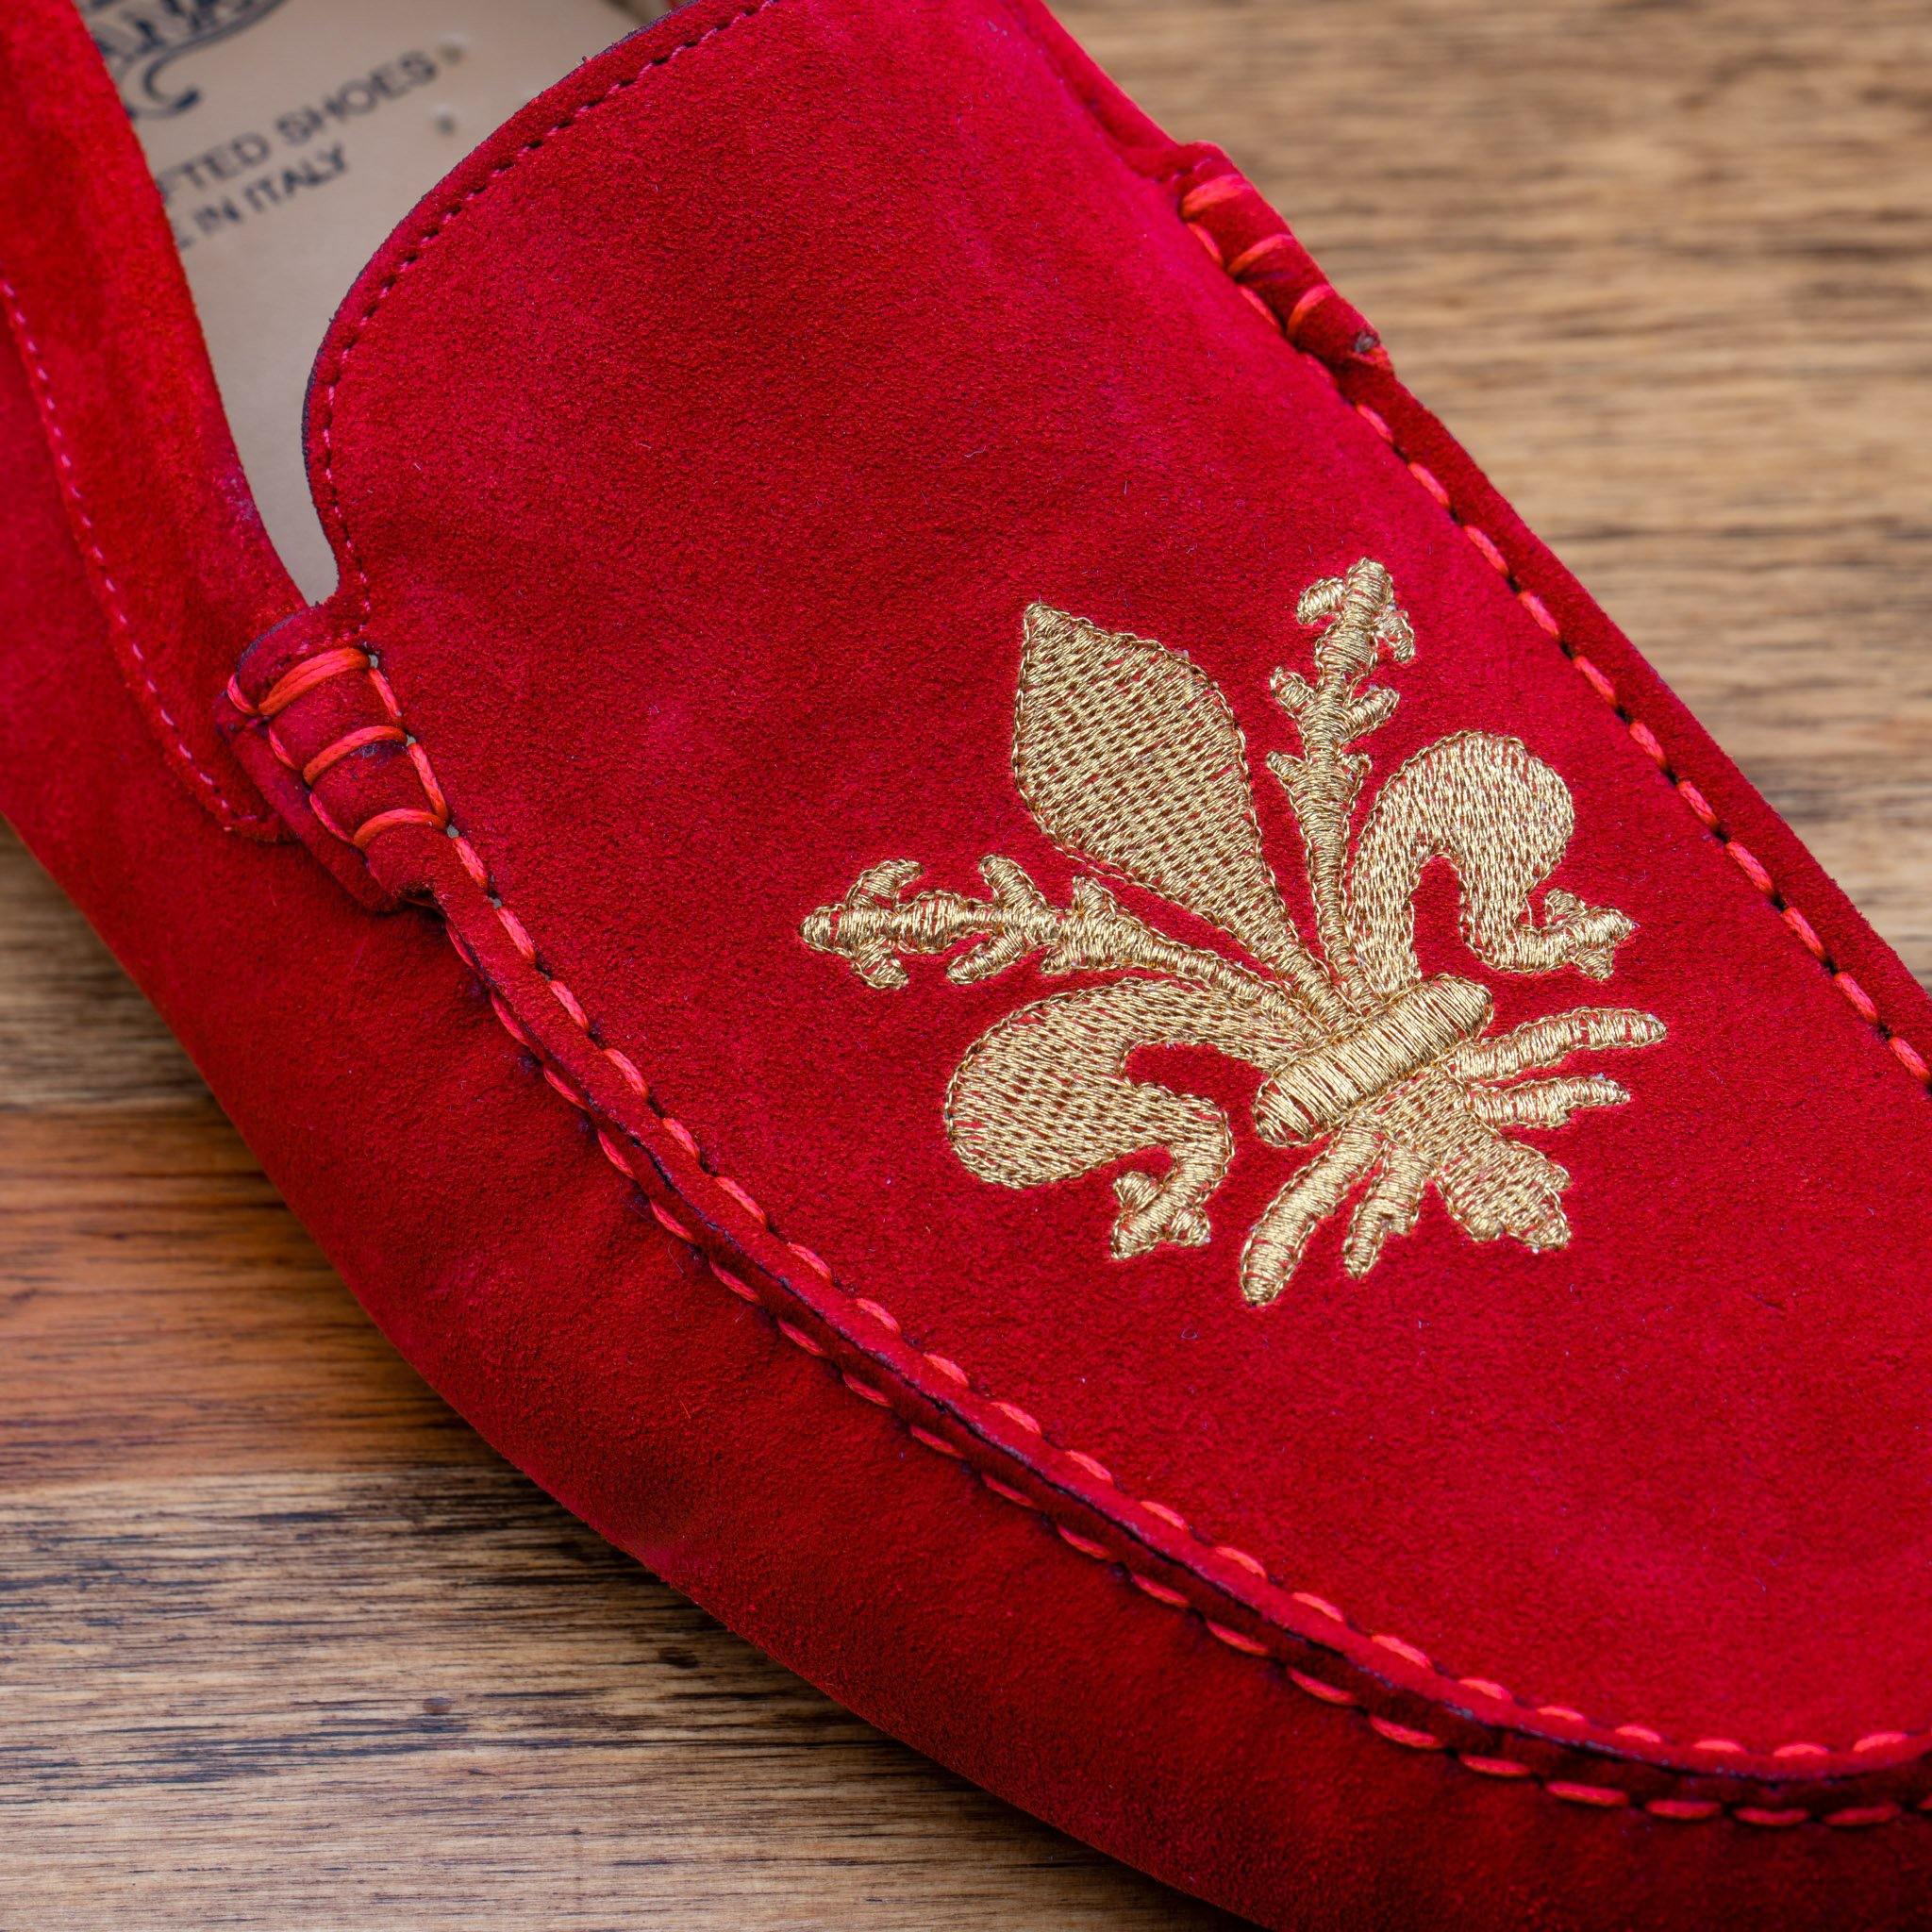 Up close picture of the gold embroidered fleur di Lis on 5303 Calzoleria Toscana Red Venetian Suede Driver